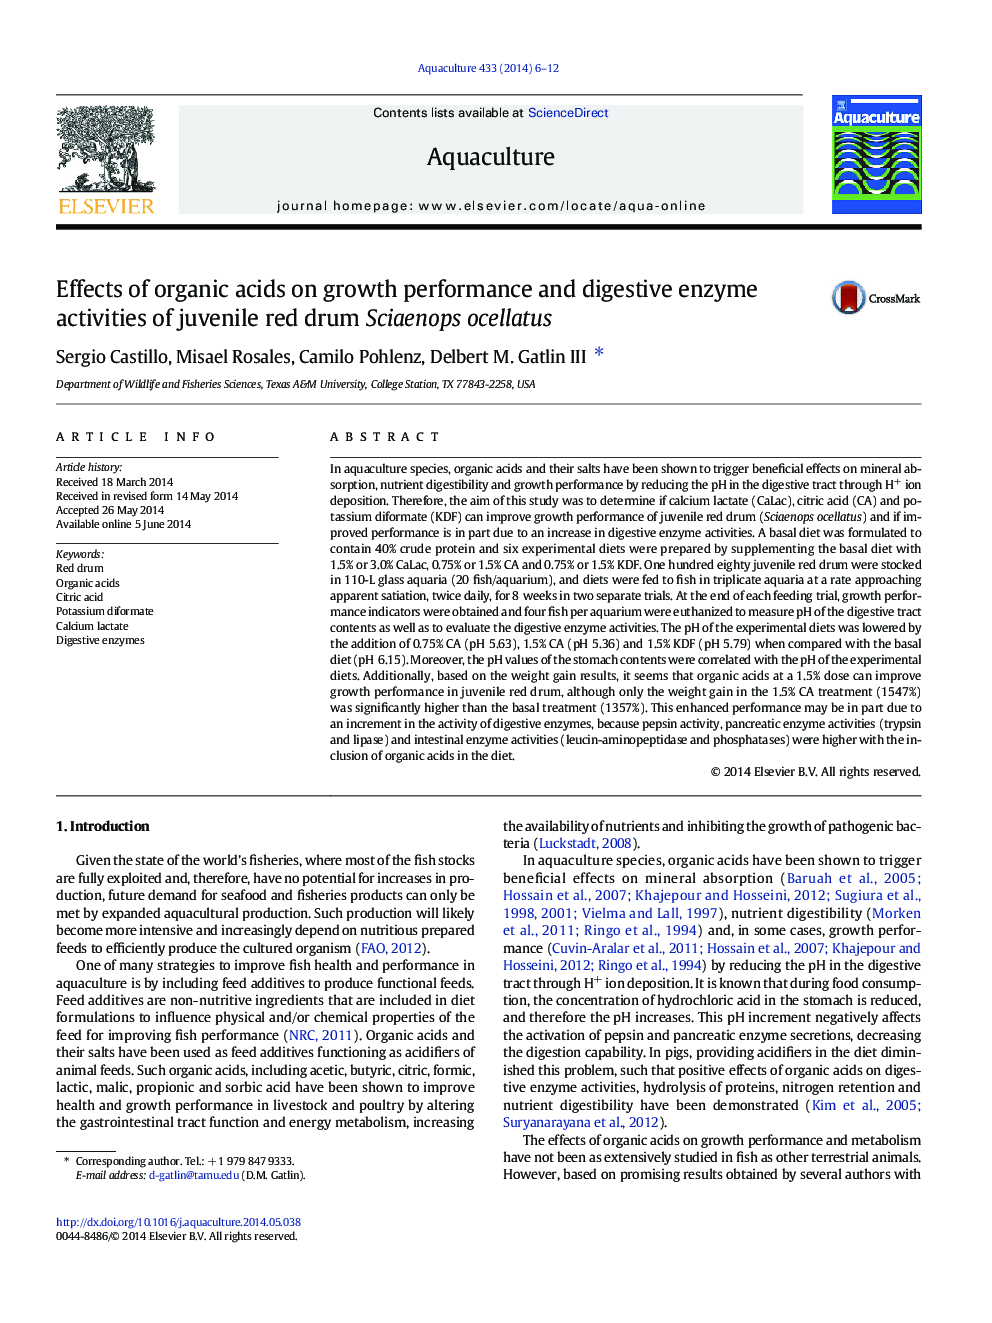 Effects of organic acids on growth performance and digestive enzyme activities of juvenile red drum Sciaenops ocellatus